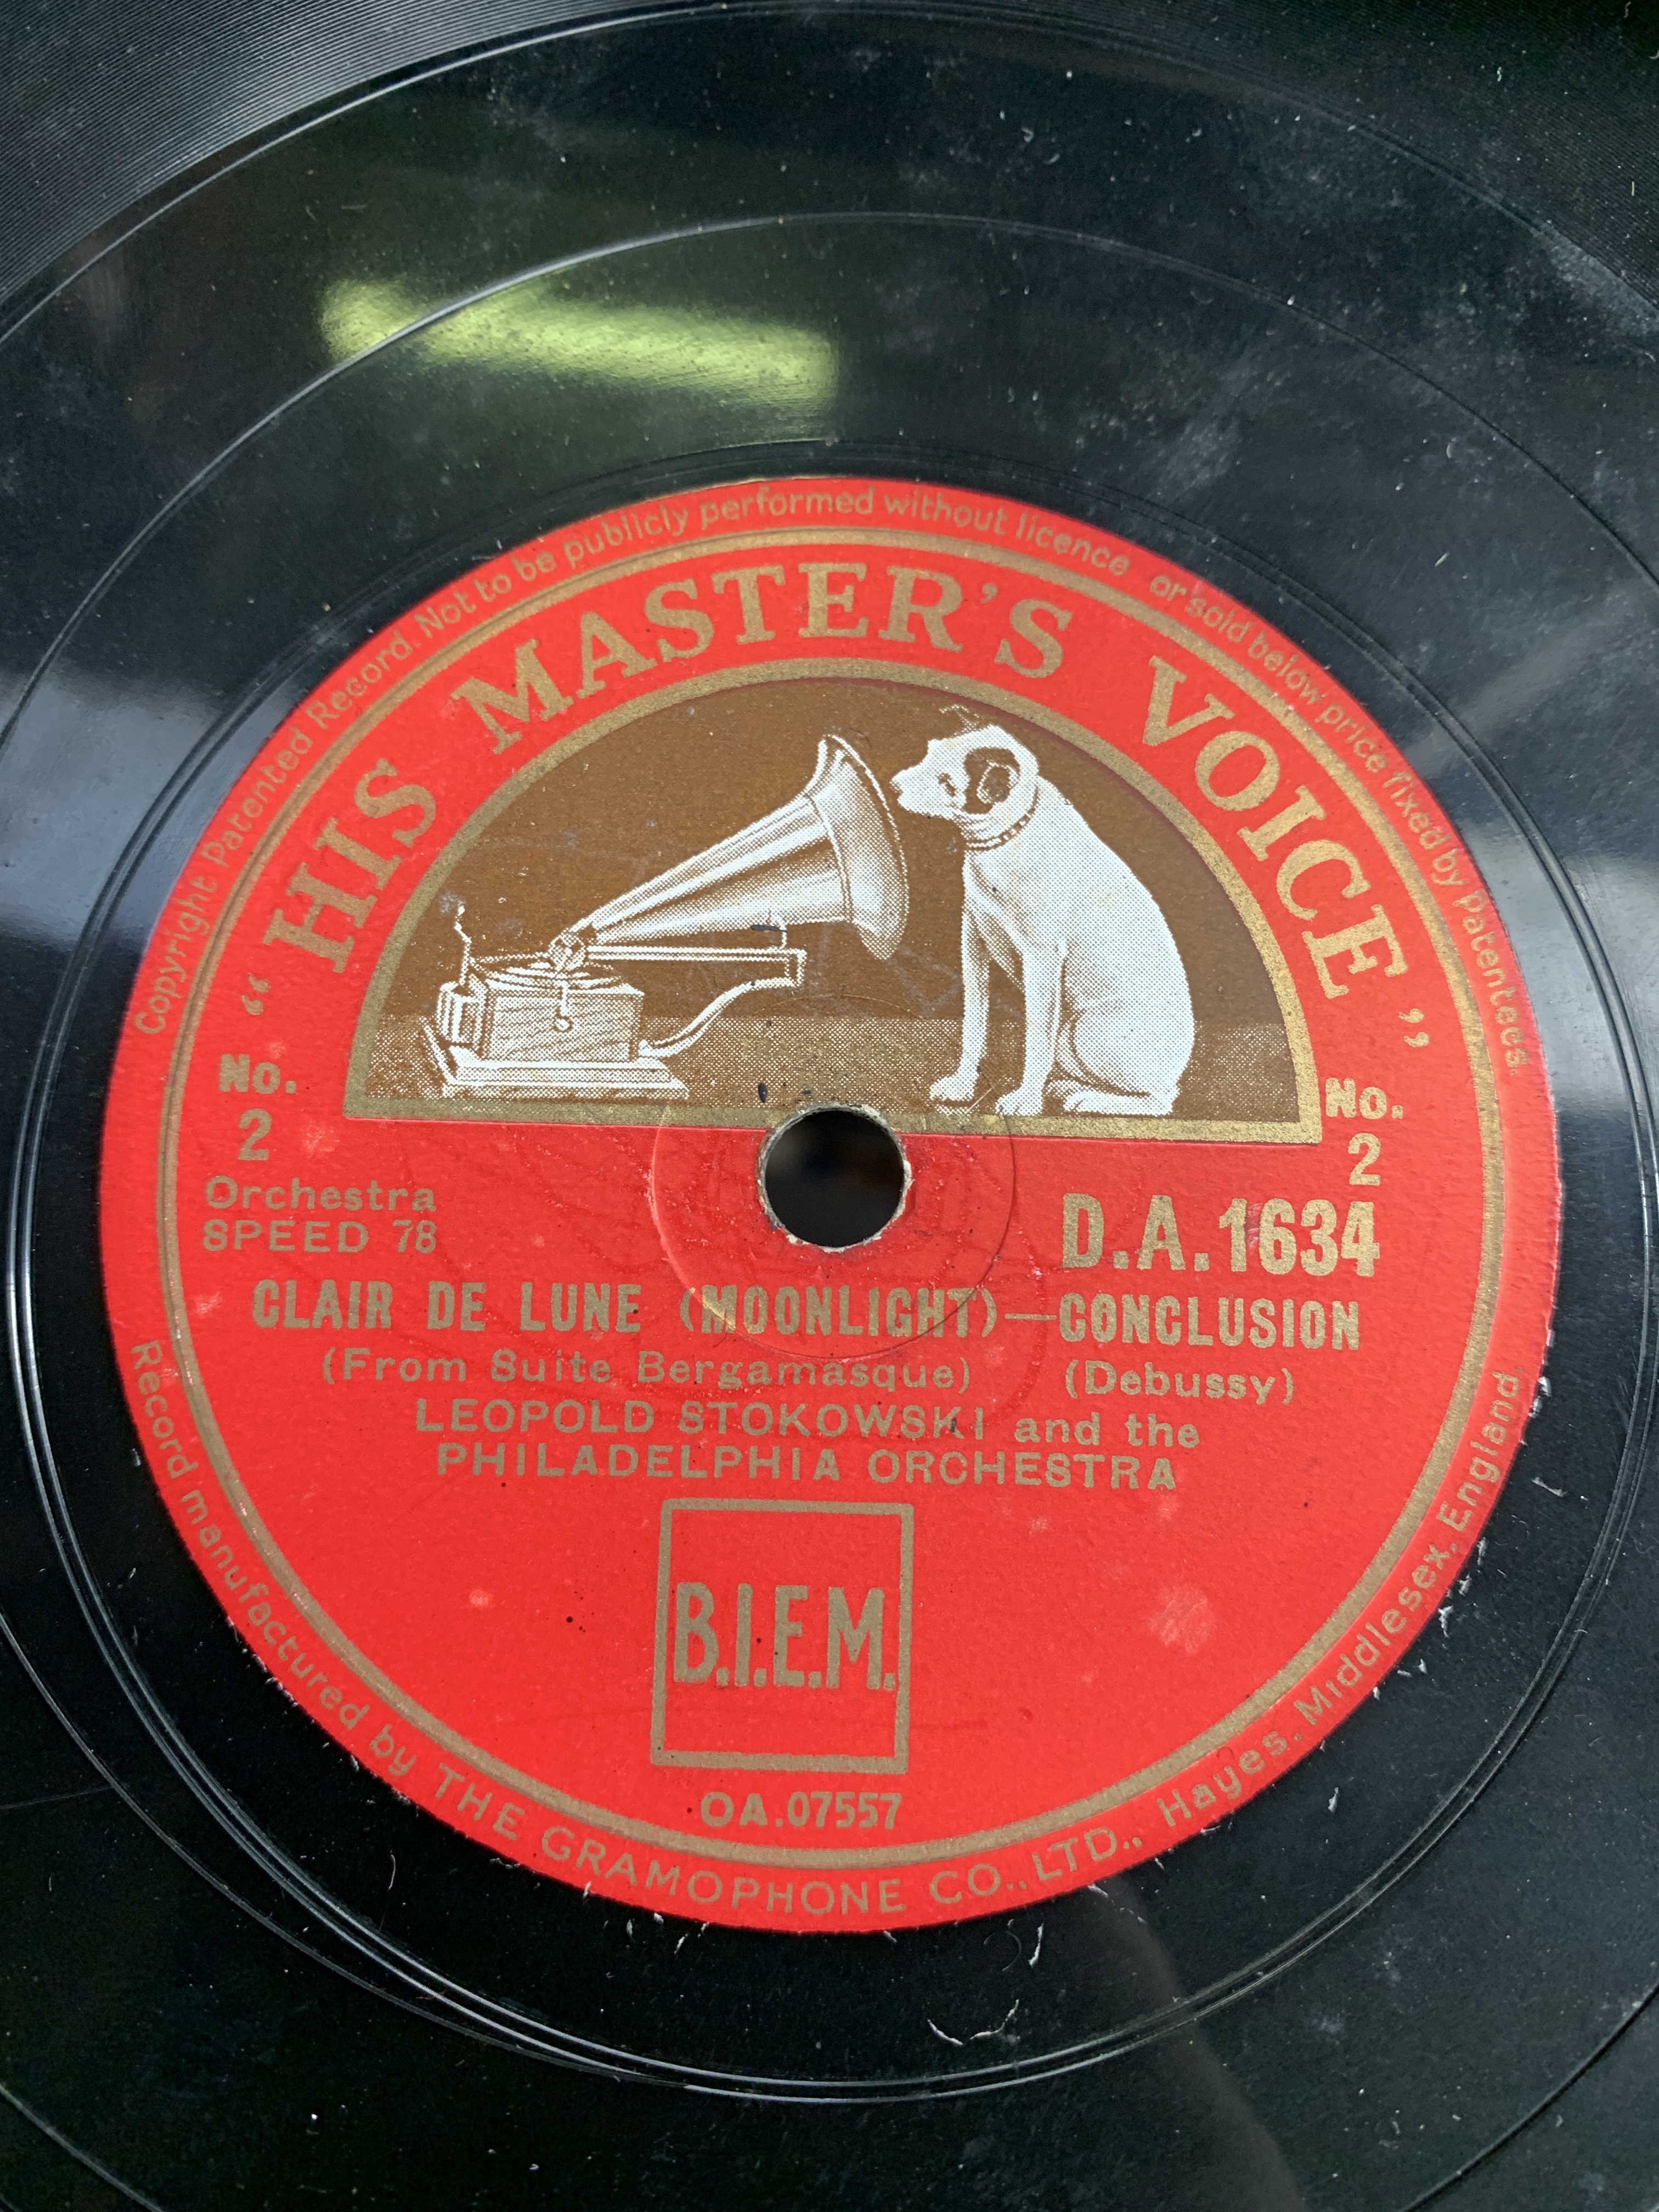 His Master's Voice wind-up gramophone - Image 6 of 17